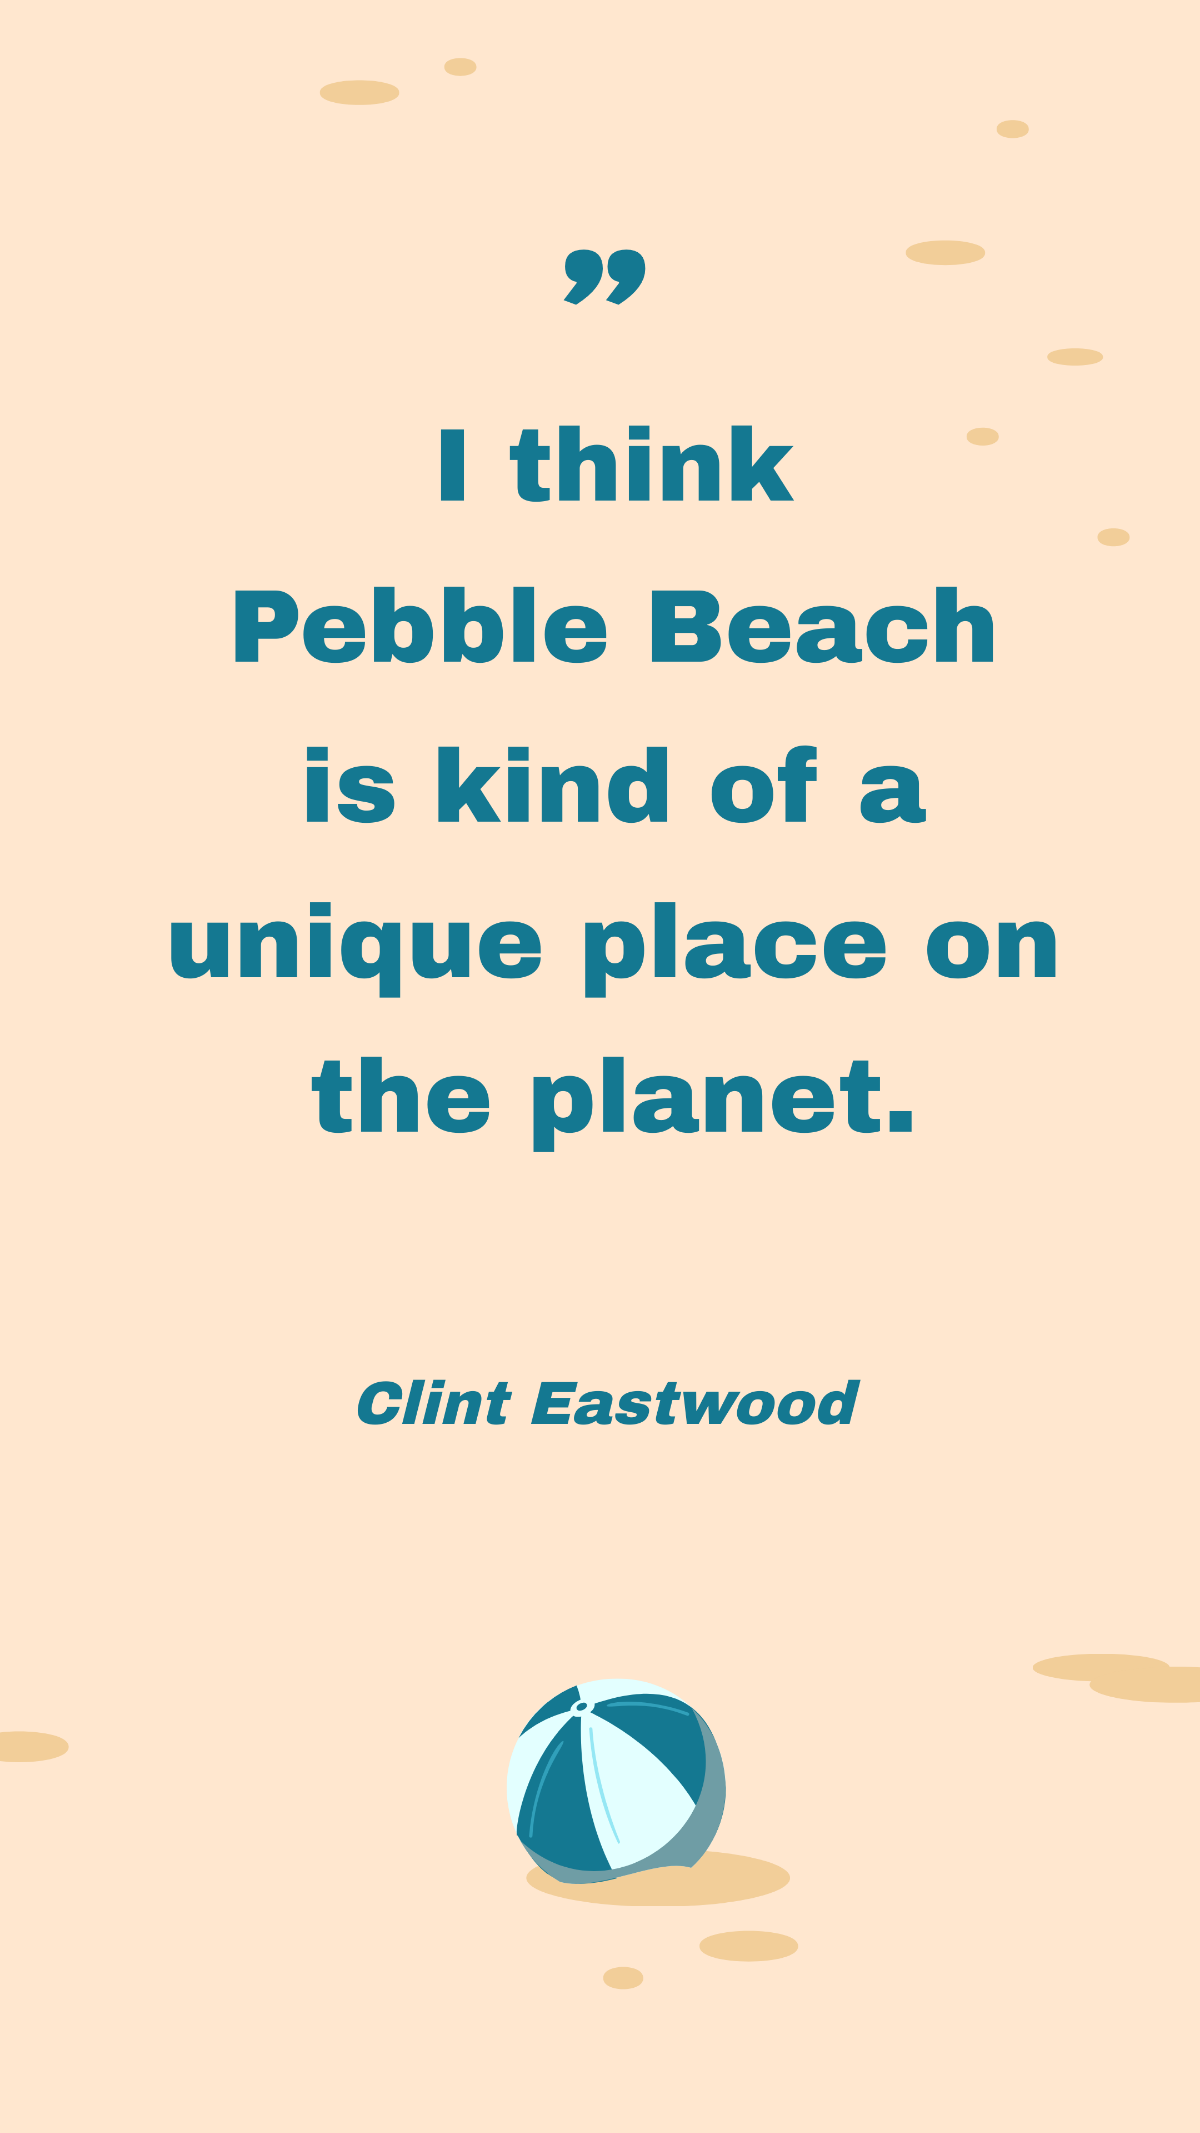 Clint Eastwood - I think Pebble Beach is kind of a unique place on the planet.